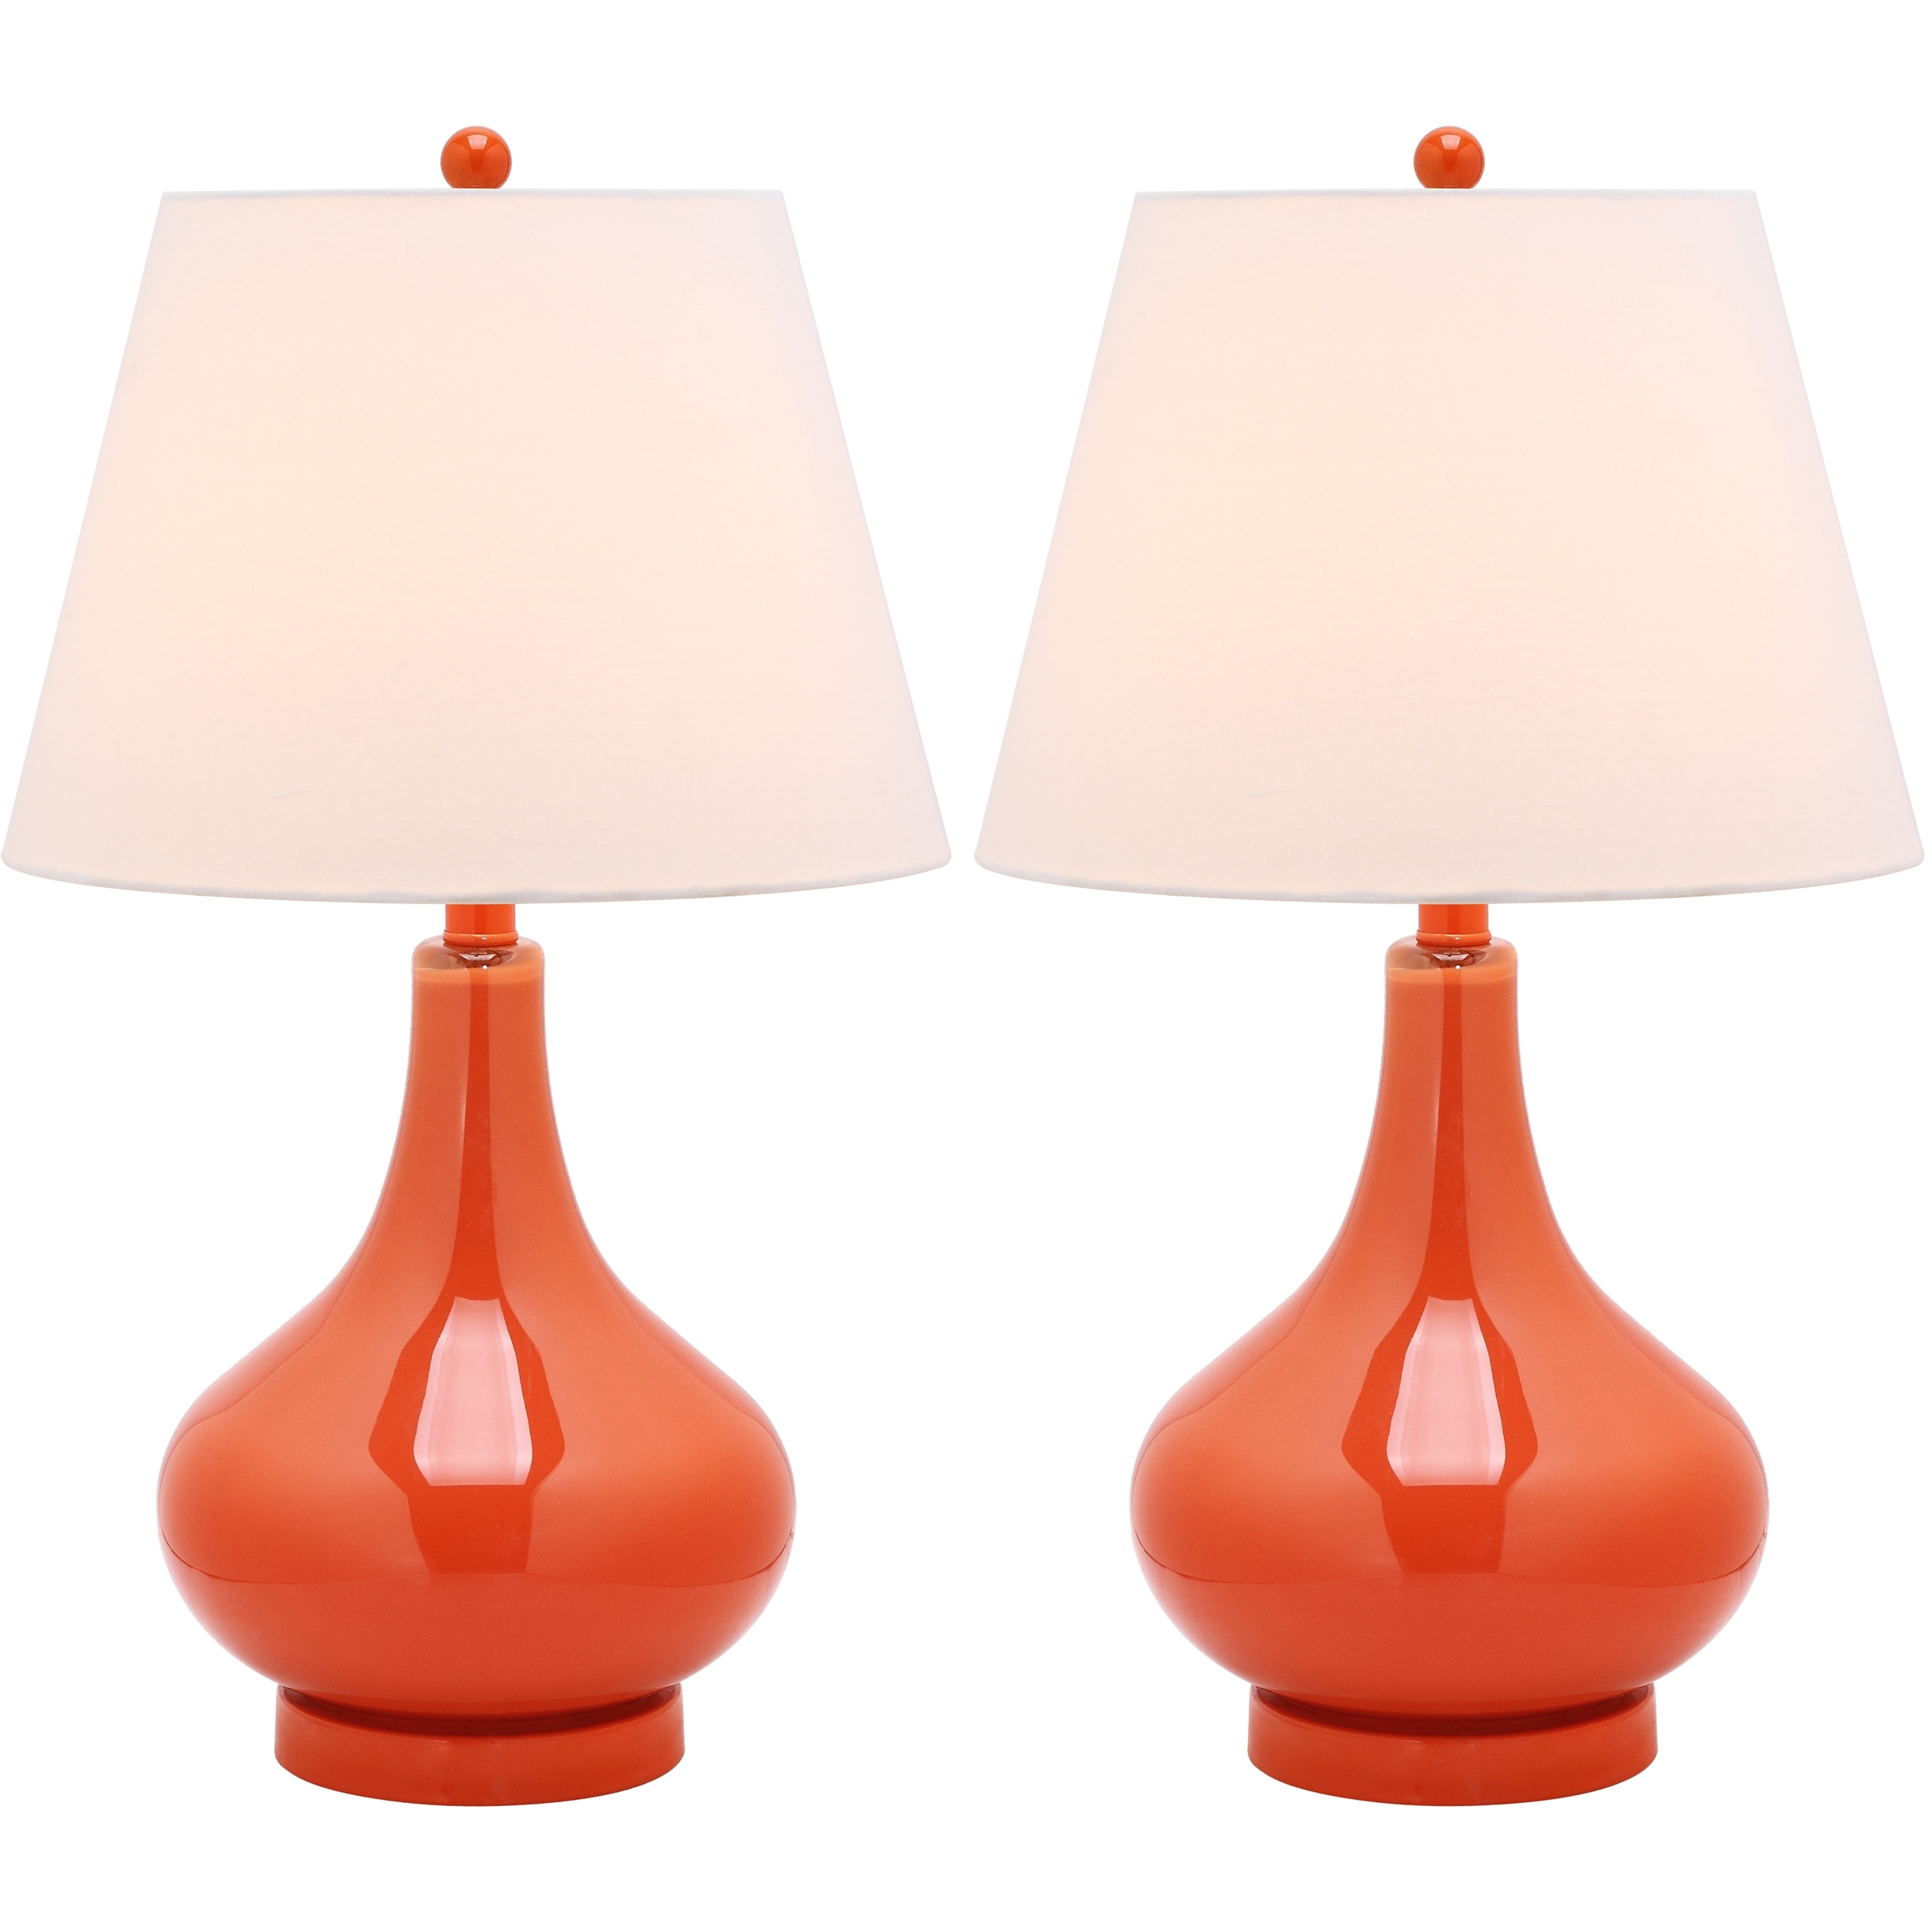 Lamps (Set of 2) Today $200.99 Sale $180.89 Save 10%